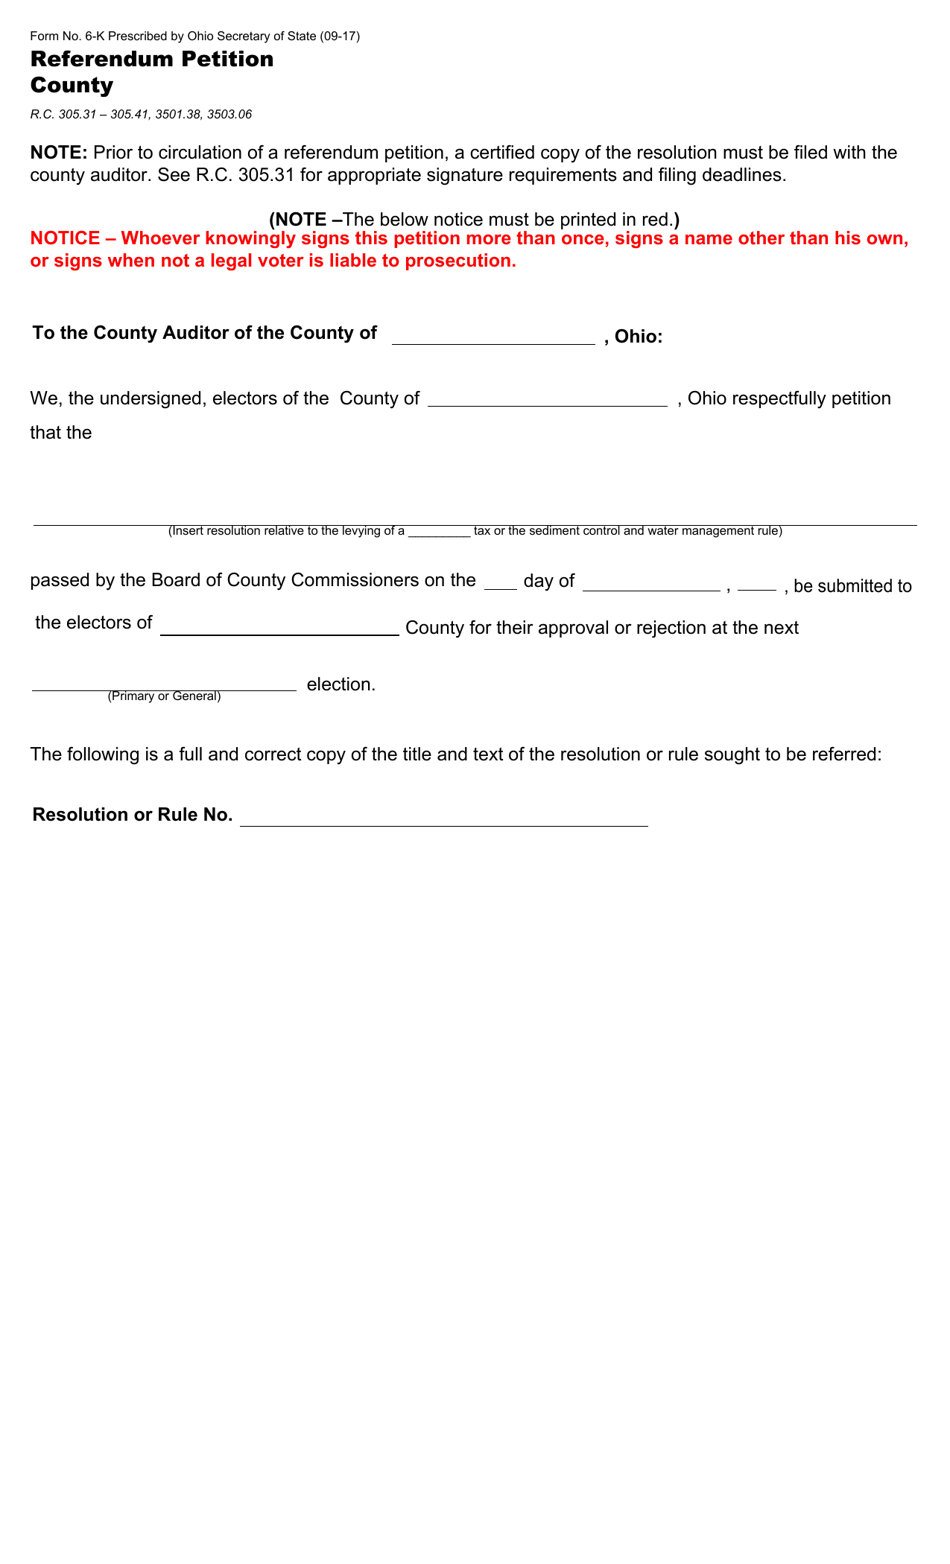 Form 6-K Referendum Petition - County - Ohio, Page 1